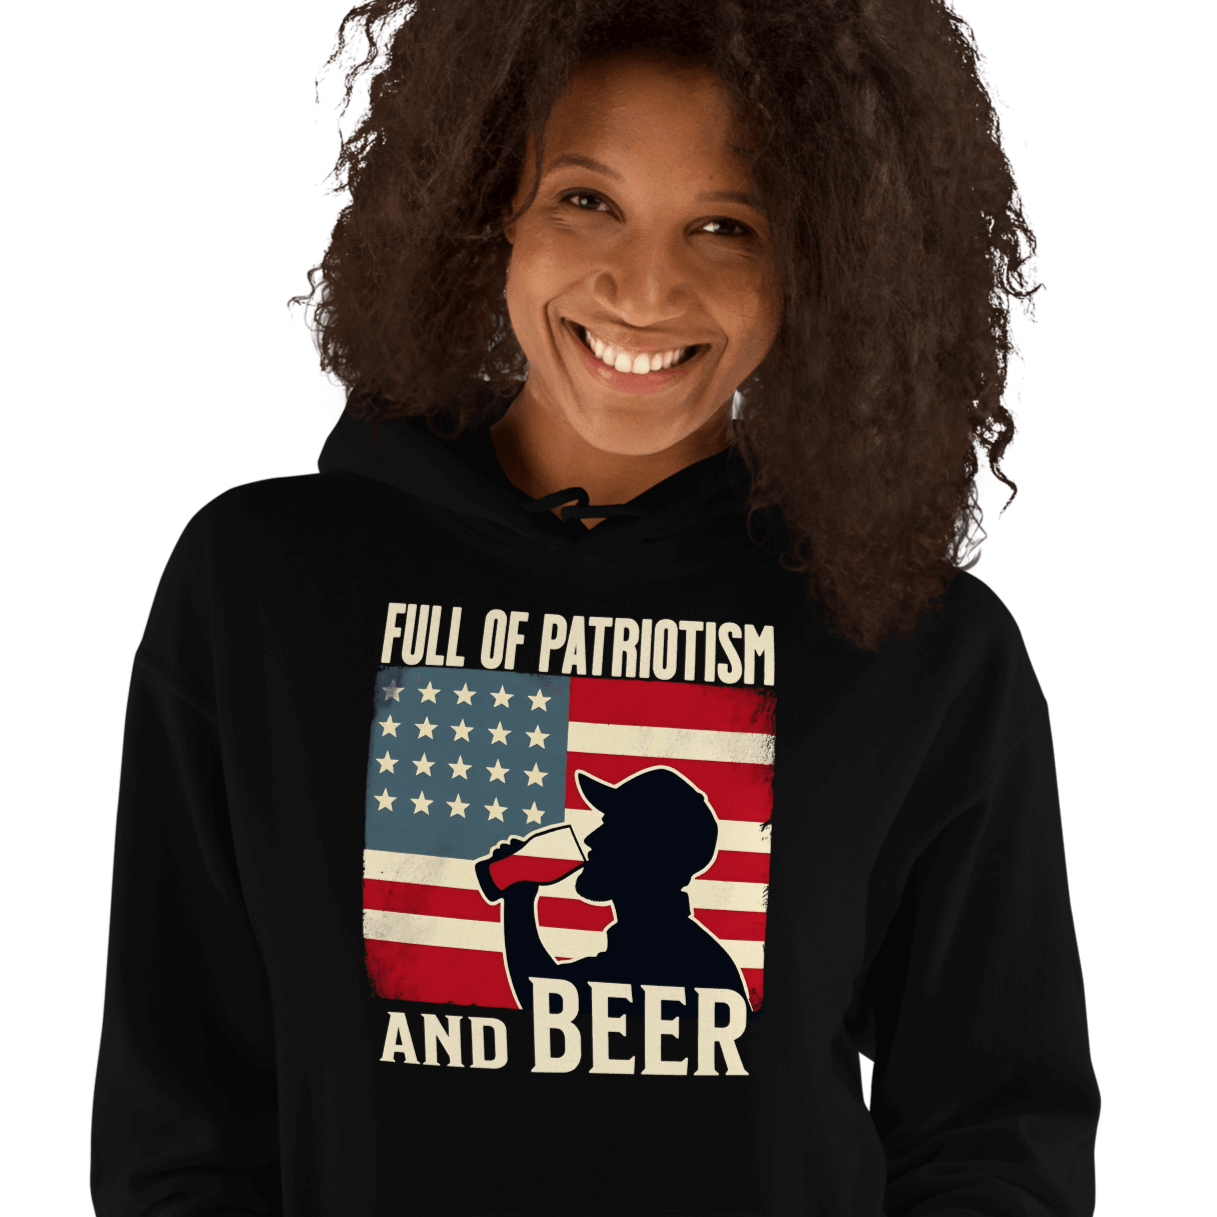 Hoodie with Full of Patriotism and Beer text and a distressed American flag background. Perfect for 4th of July.